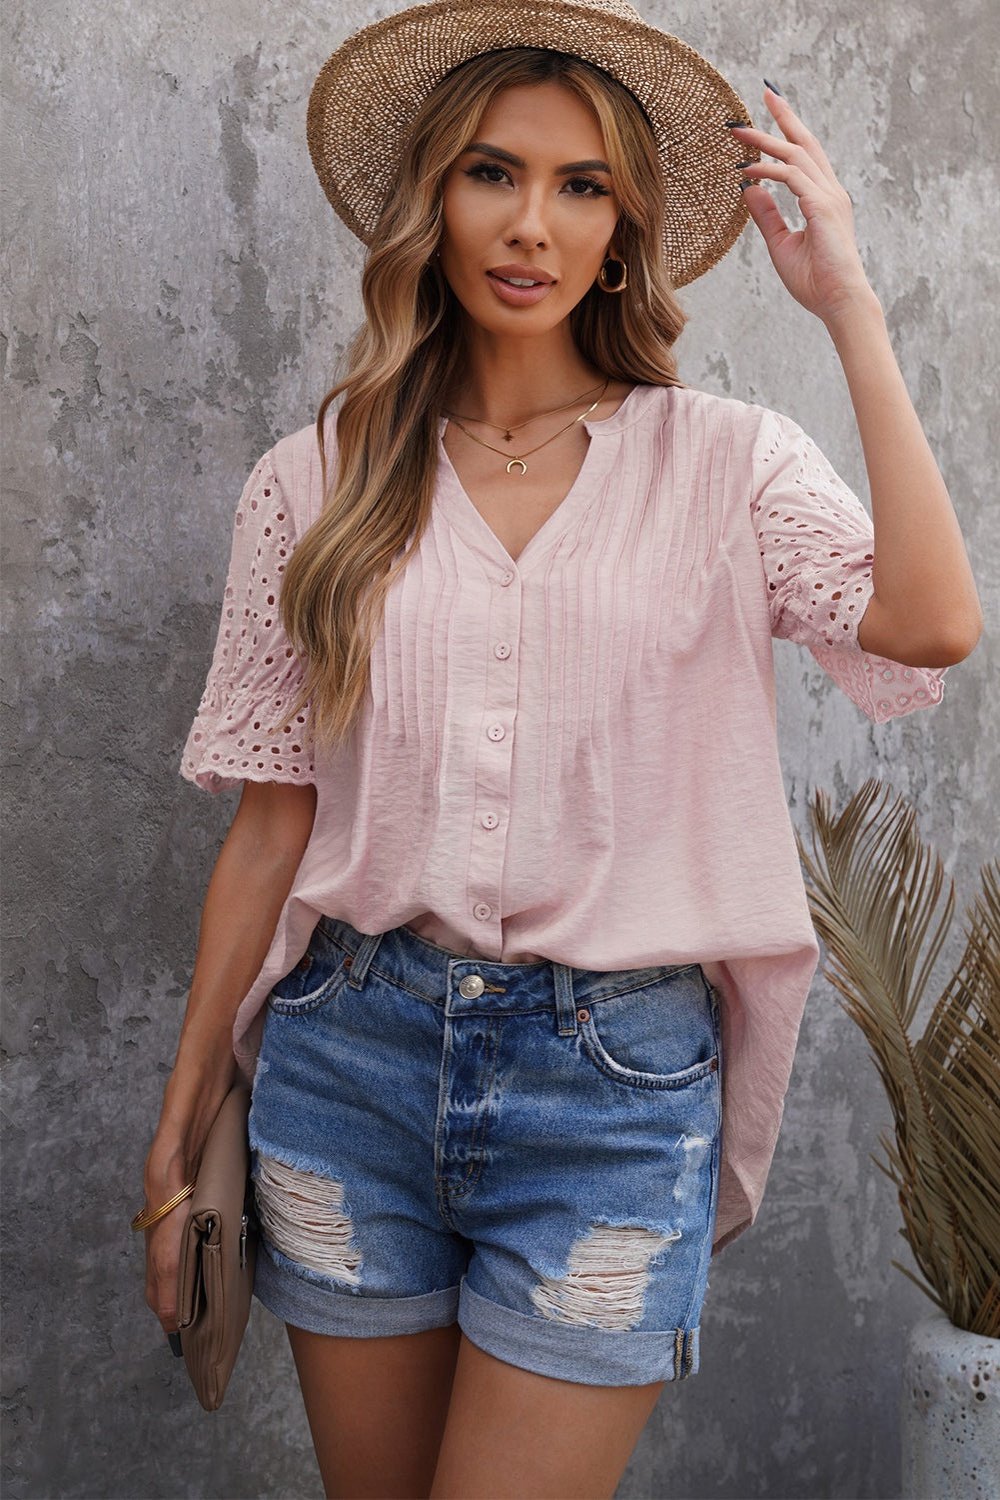 Eyelet Short Sleeve Pleated Blouse - Shirts - FITGGINS